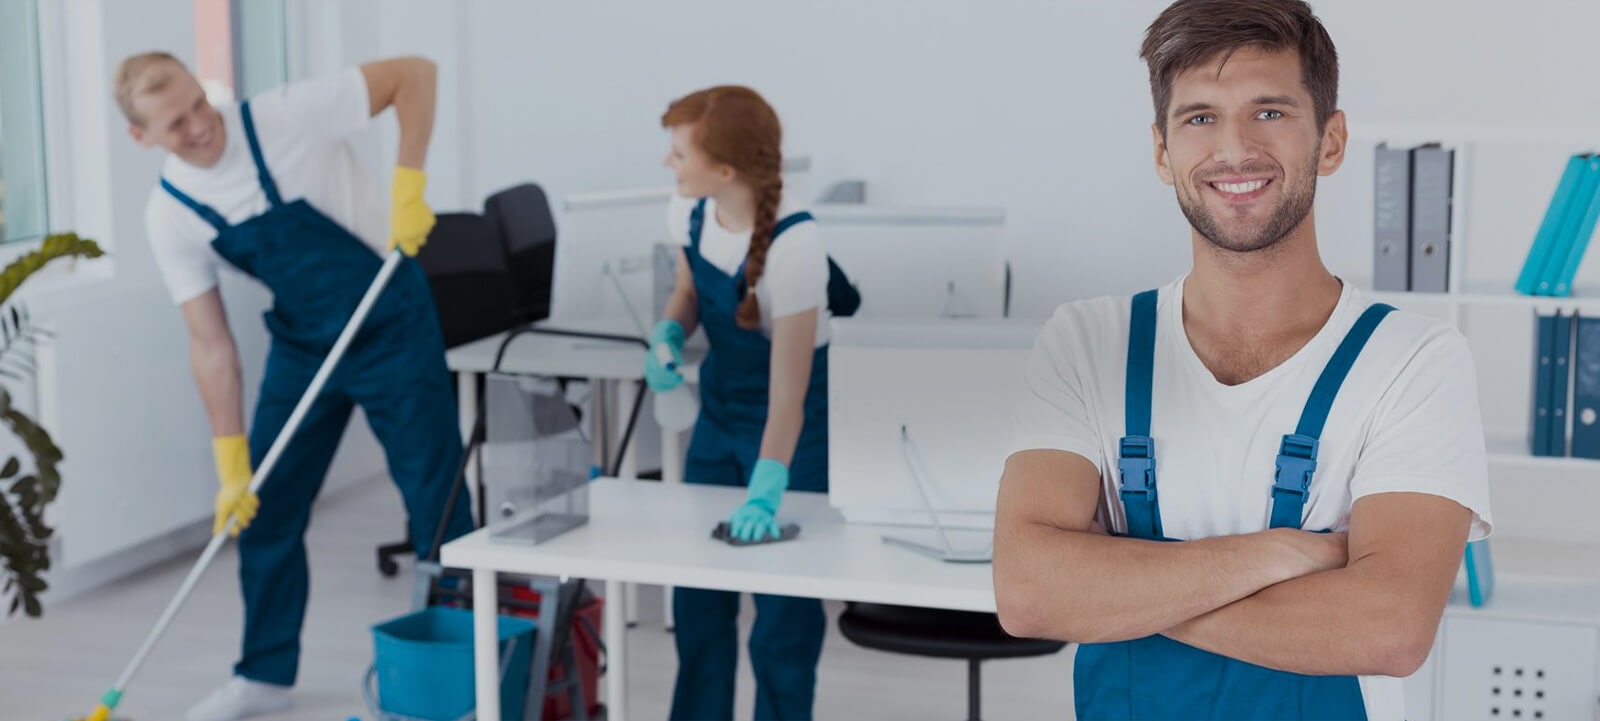 3 Ways Professional Cleaners Can Help Your Business